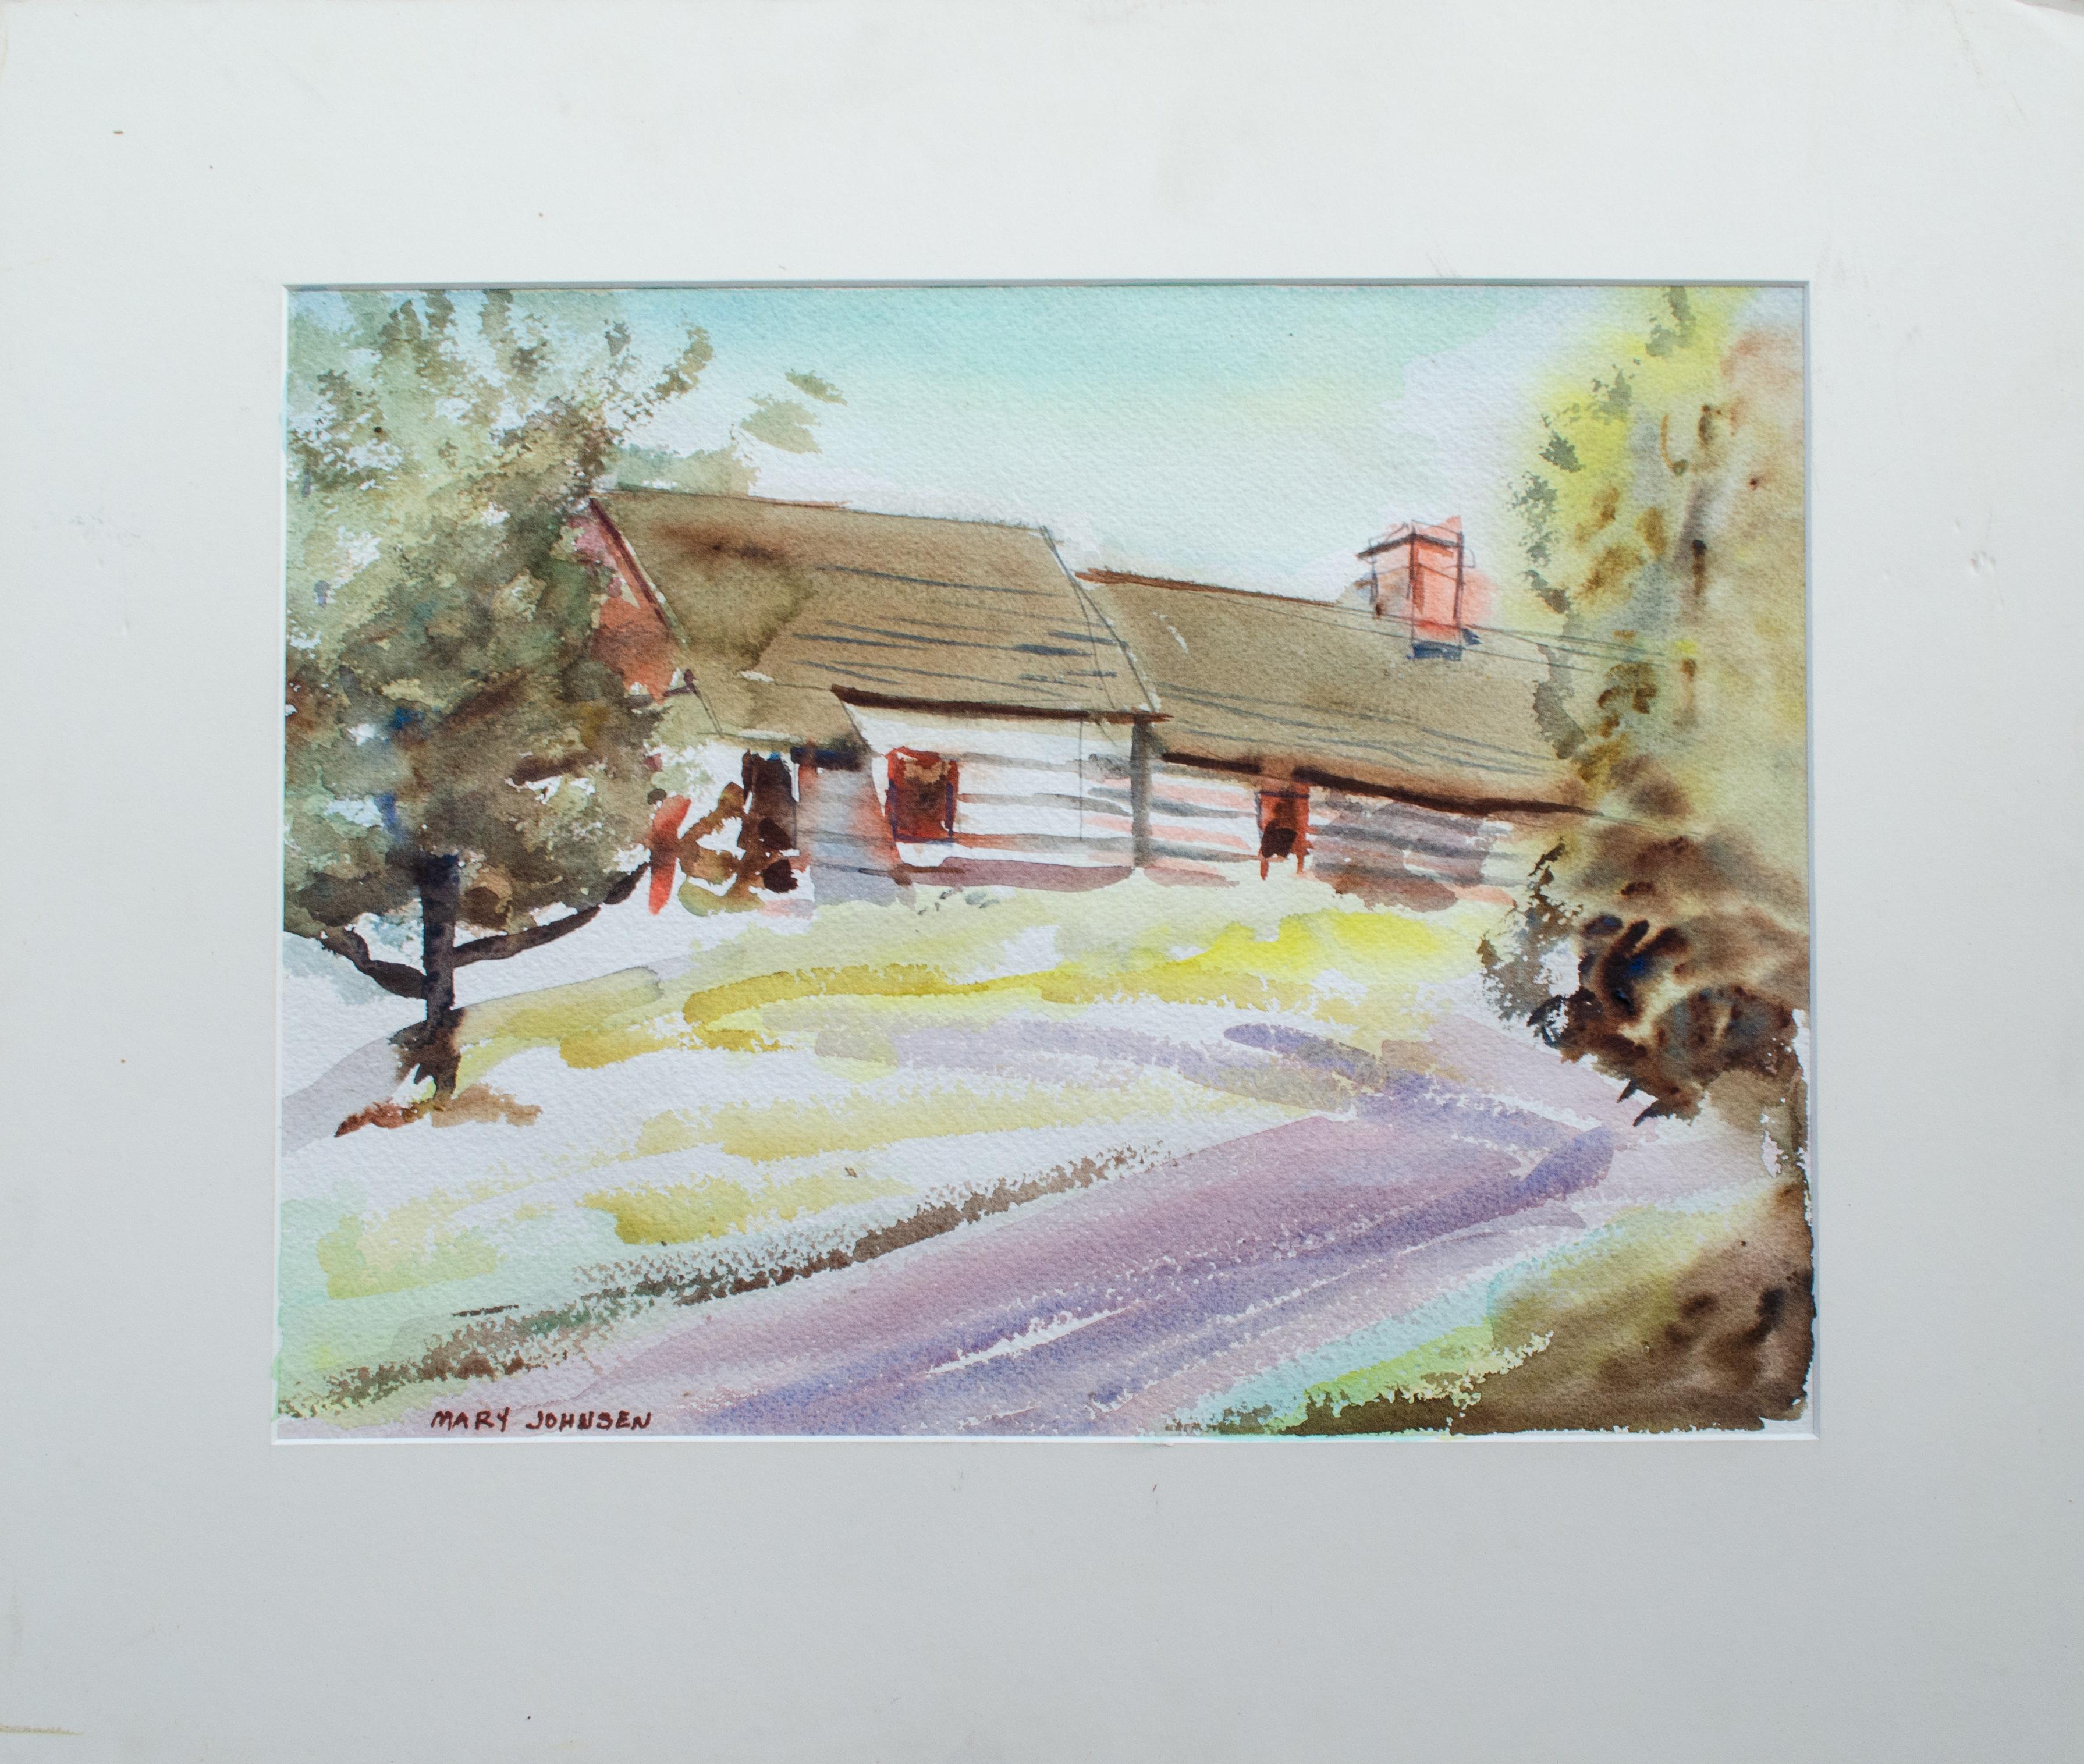 4 American Watercolors, c. 1950s, by Mary M. Johnsen - Art by Mary Johnsen